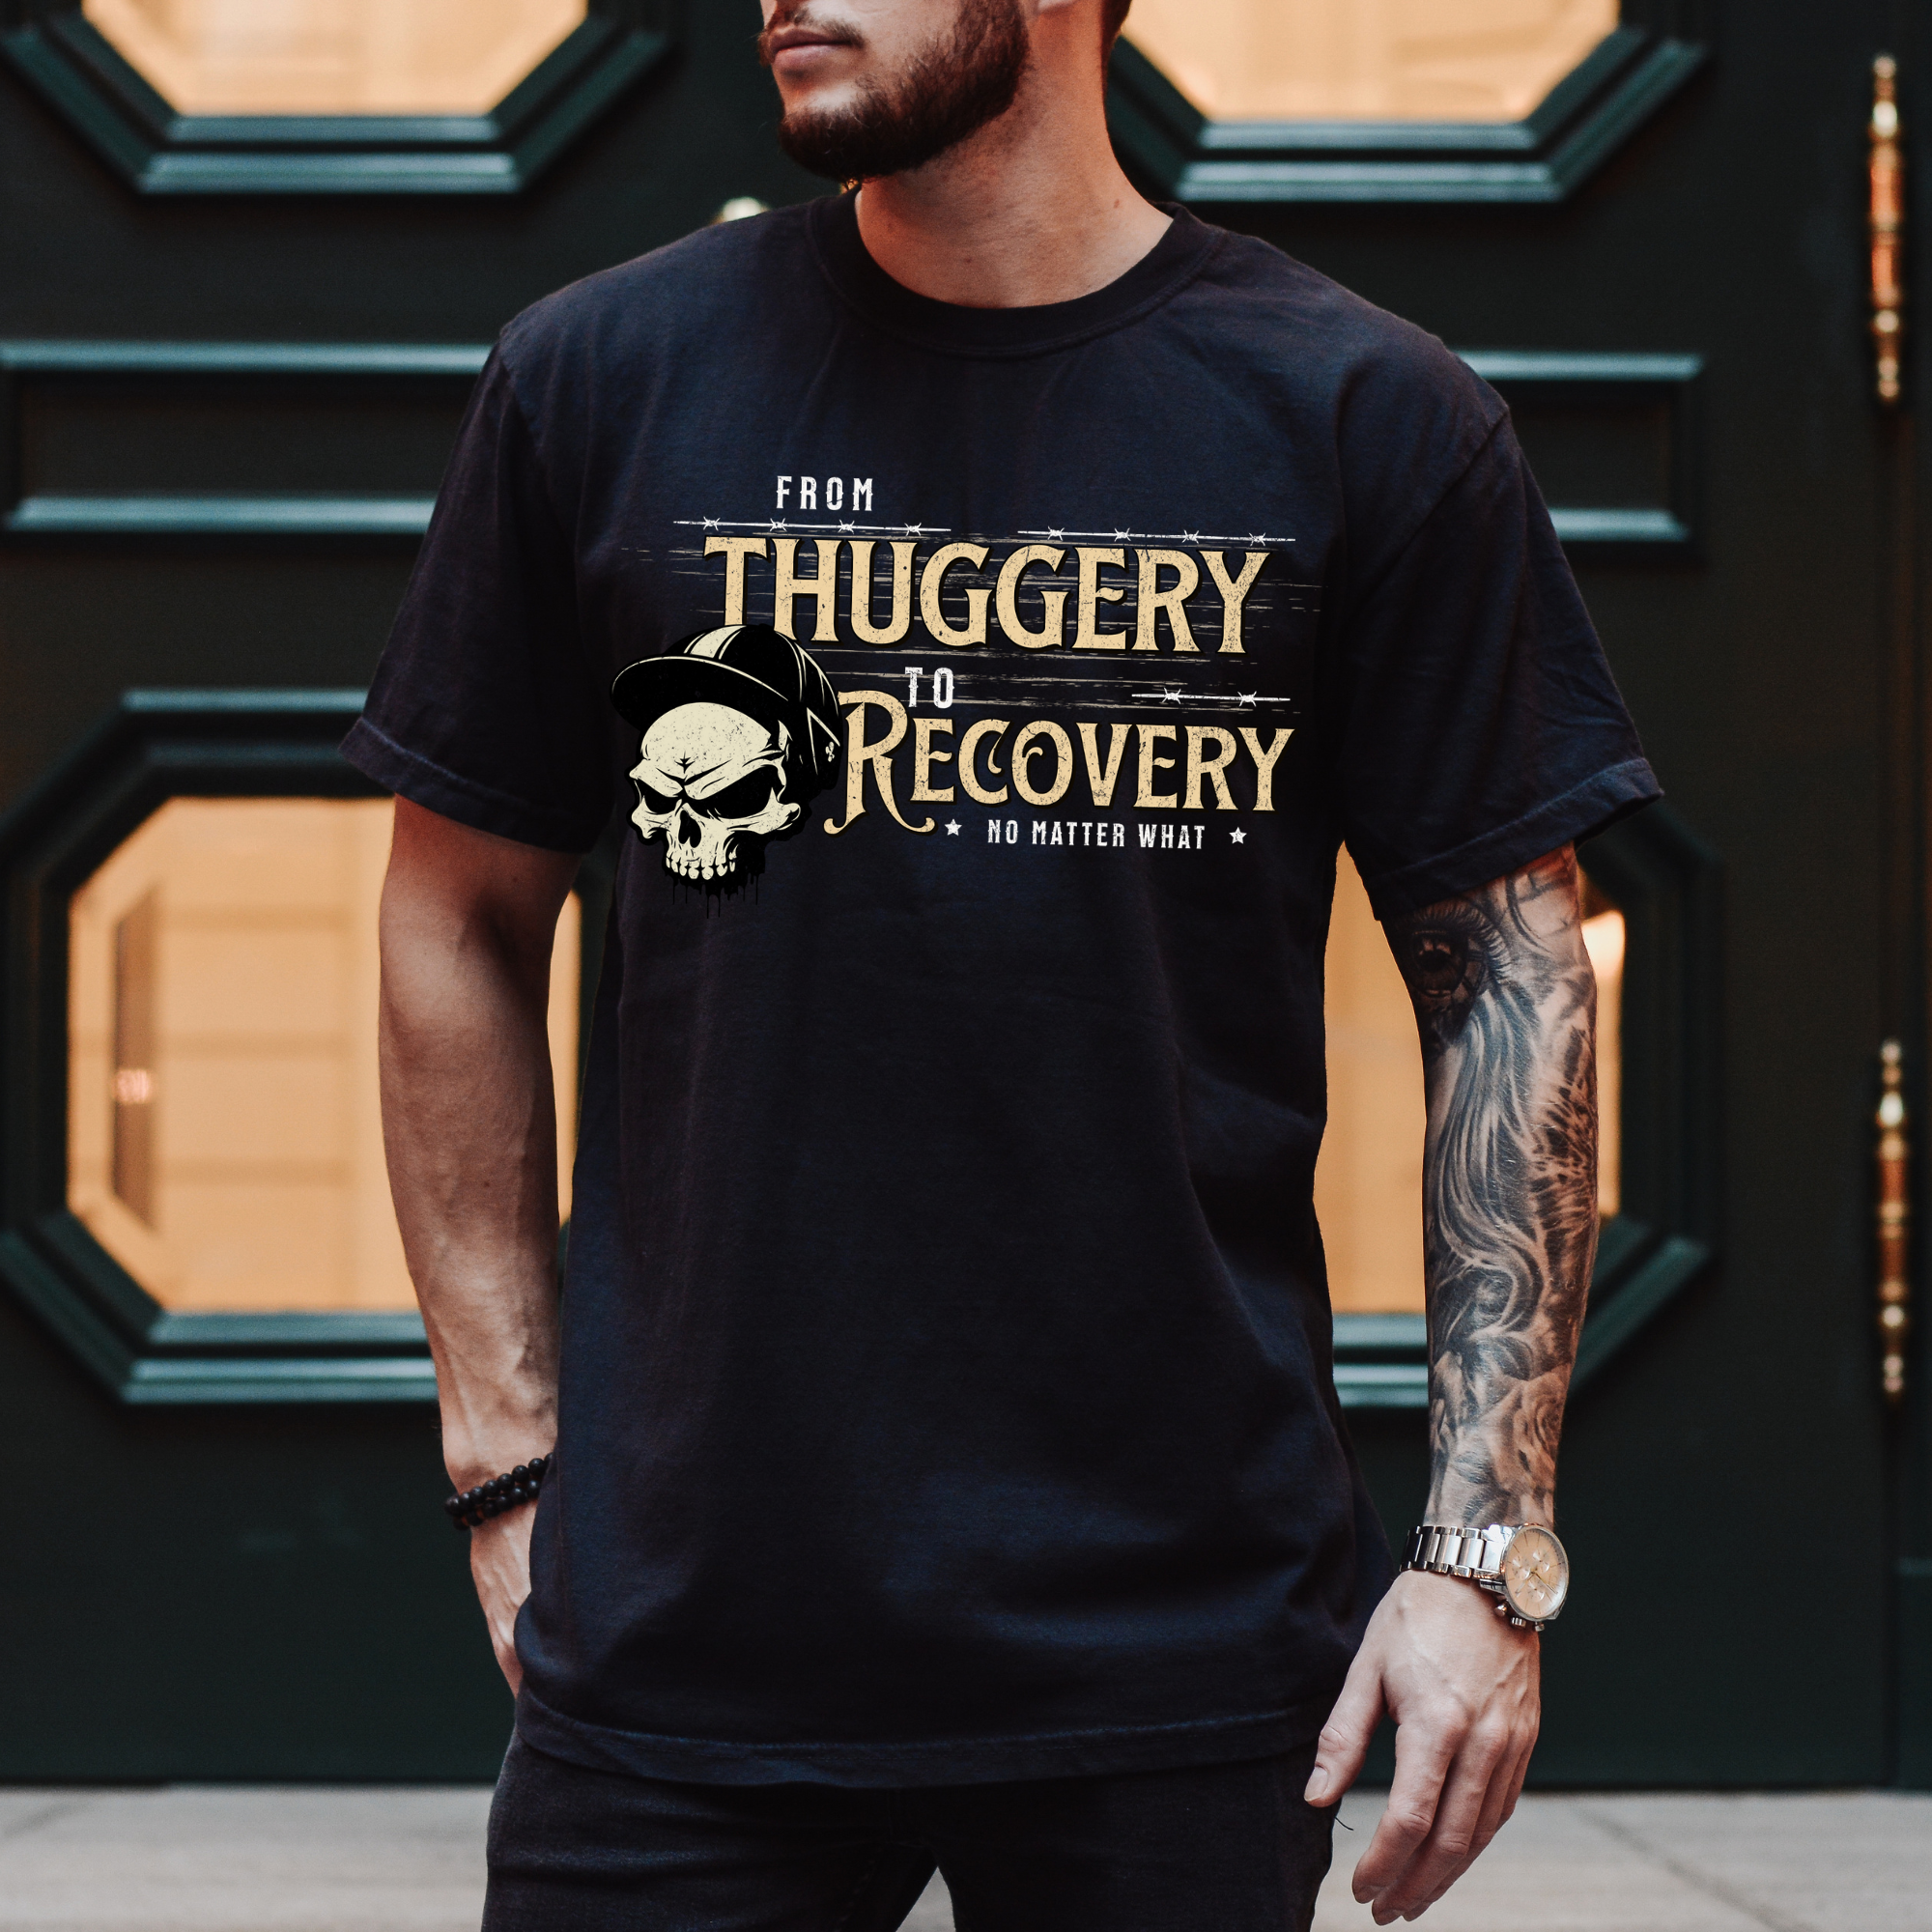 Recovery Comfort Colors T-Shirt, Inspiring Sobriety